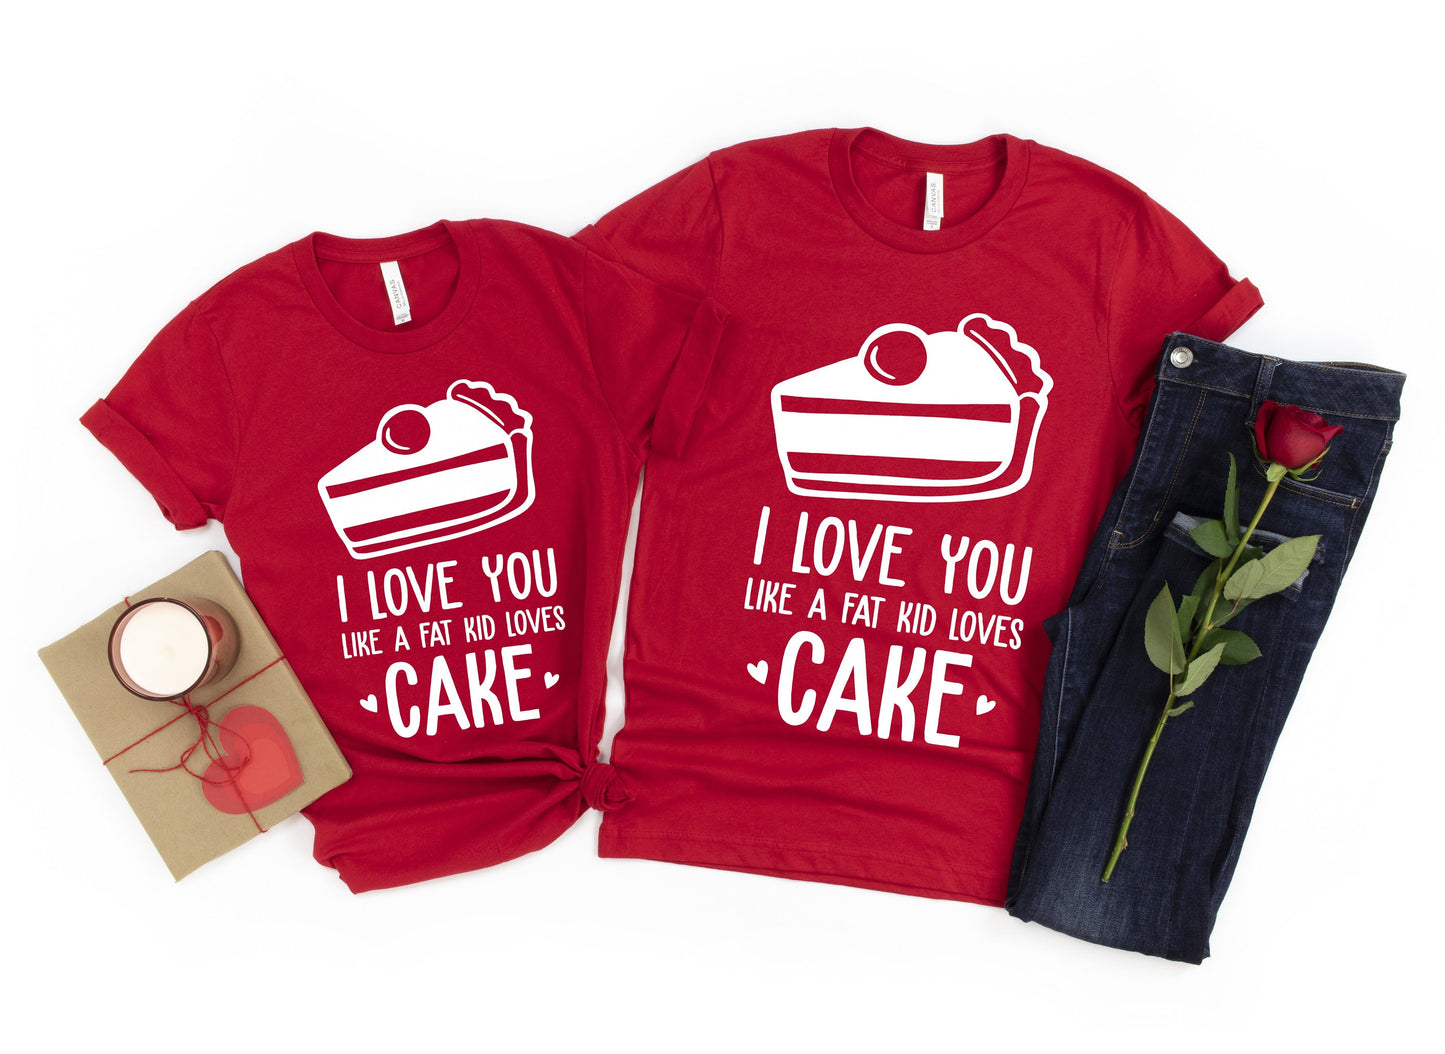 I Love You Like a Fat Kid Loves Cake Valentine's Day Couples t-shirt - Funny Valentine's shirt -Matching Couples Shirts